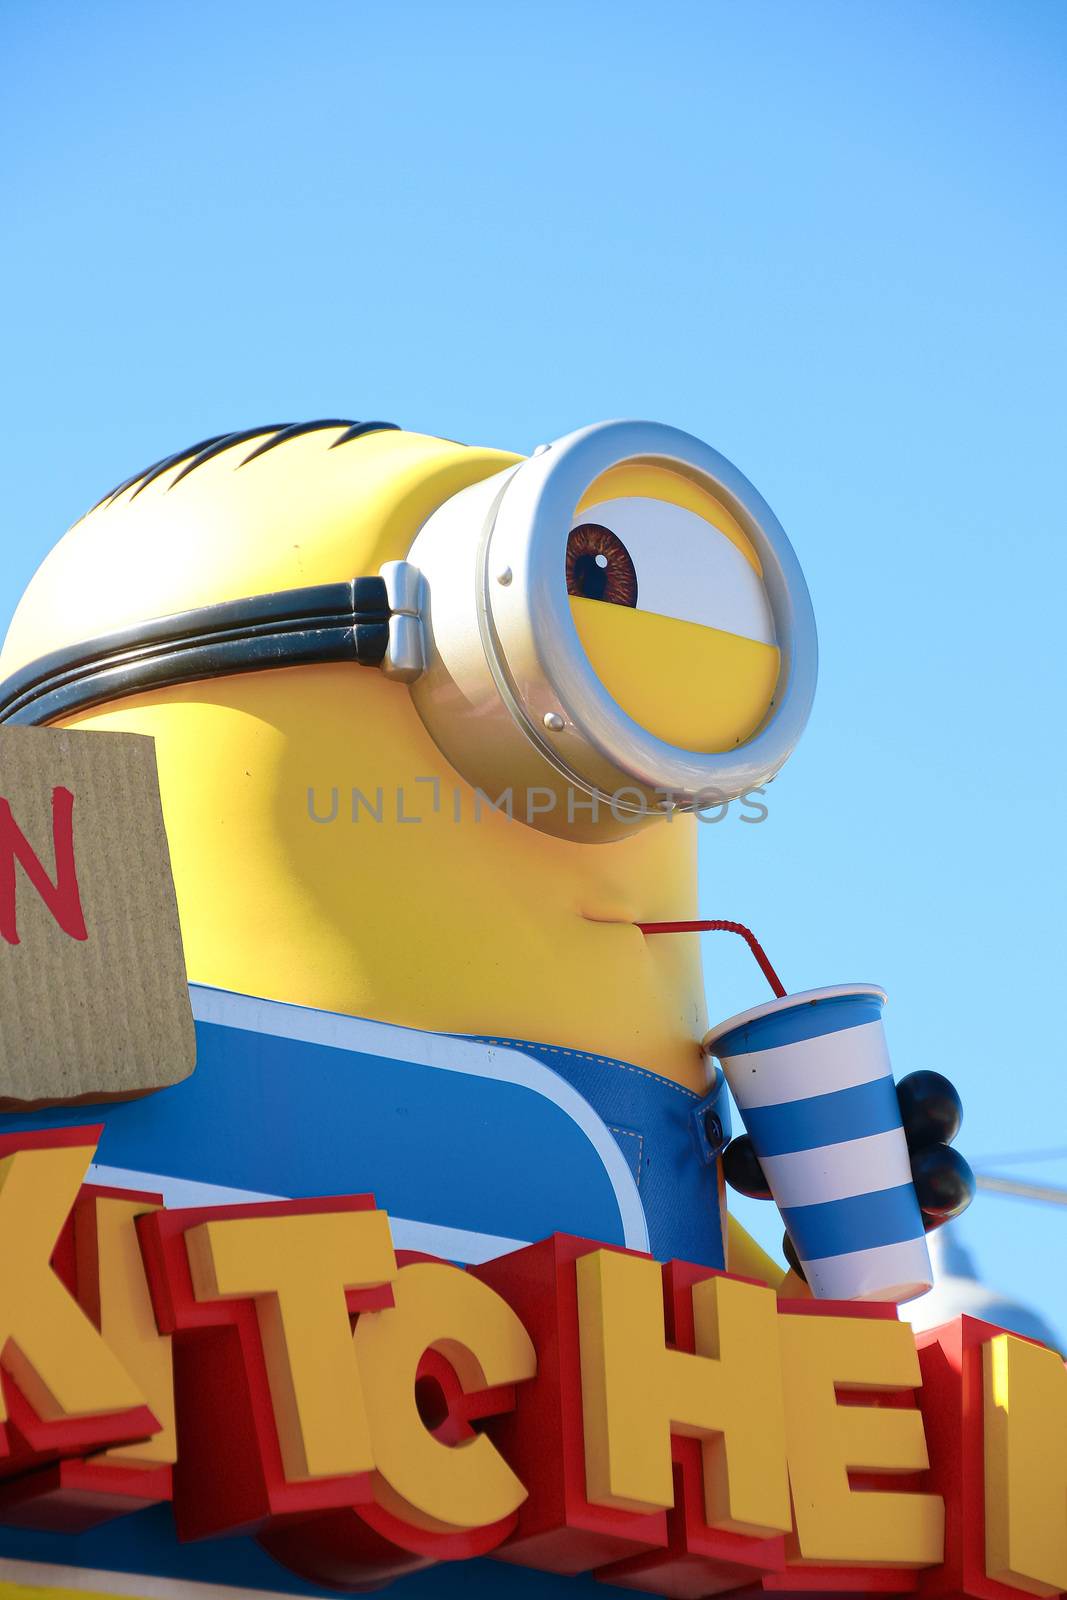 OSAKA, JAPAN - Feb 19, 2020 : Statue of "HAPPY MINION", located in Universal Studios Japan, Osaka, Japan. Minions are famous character from Despicable Me animation. by USA-TARO